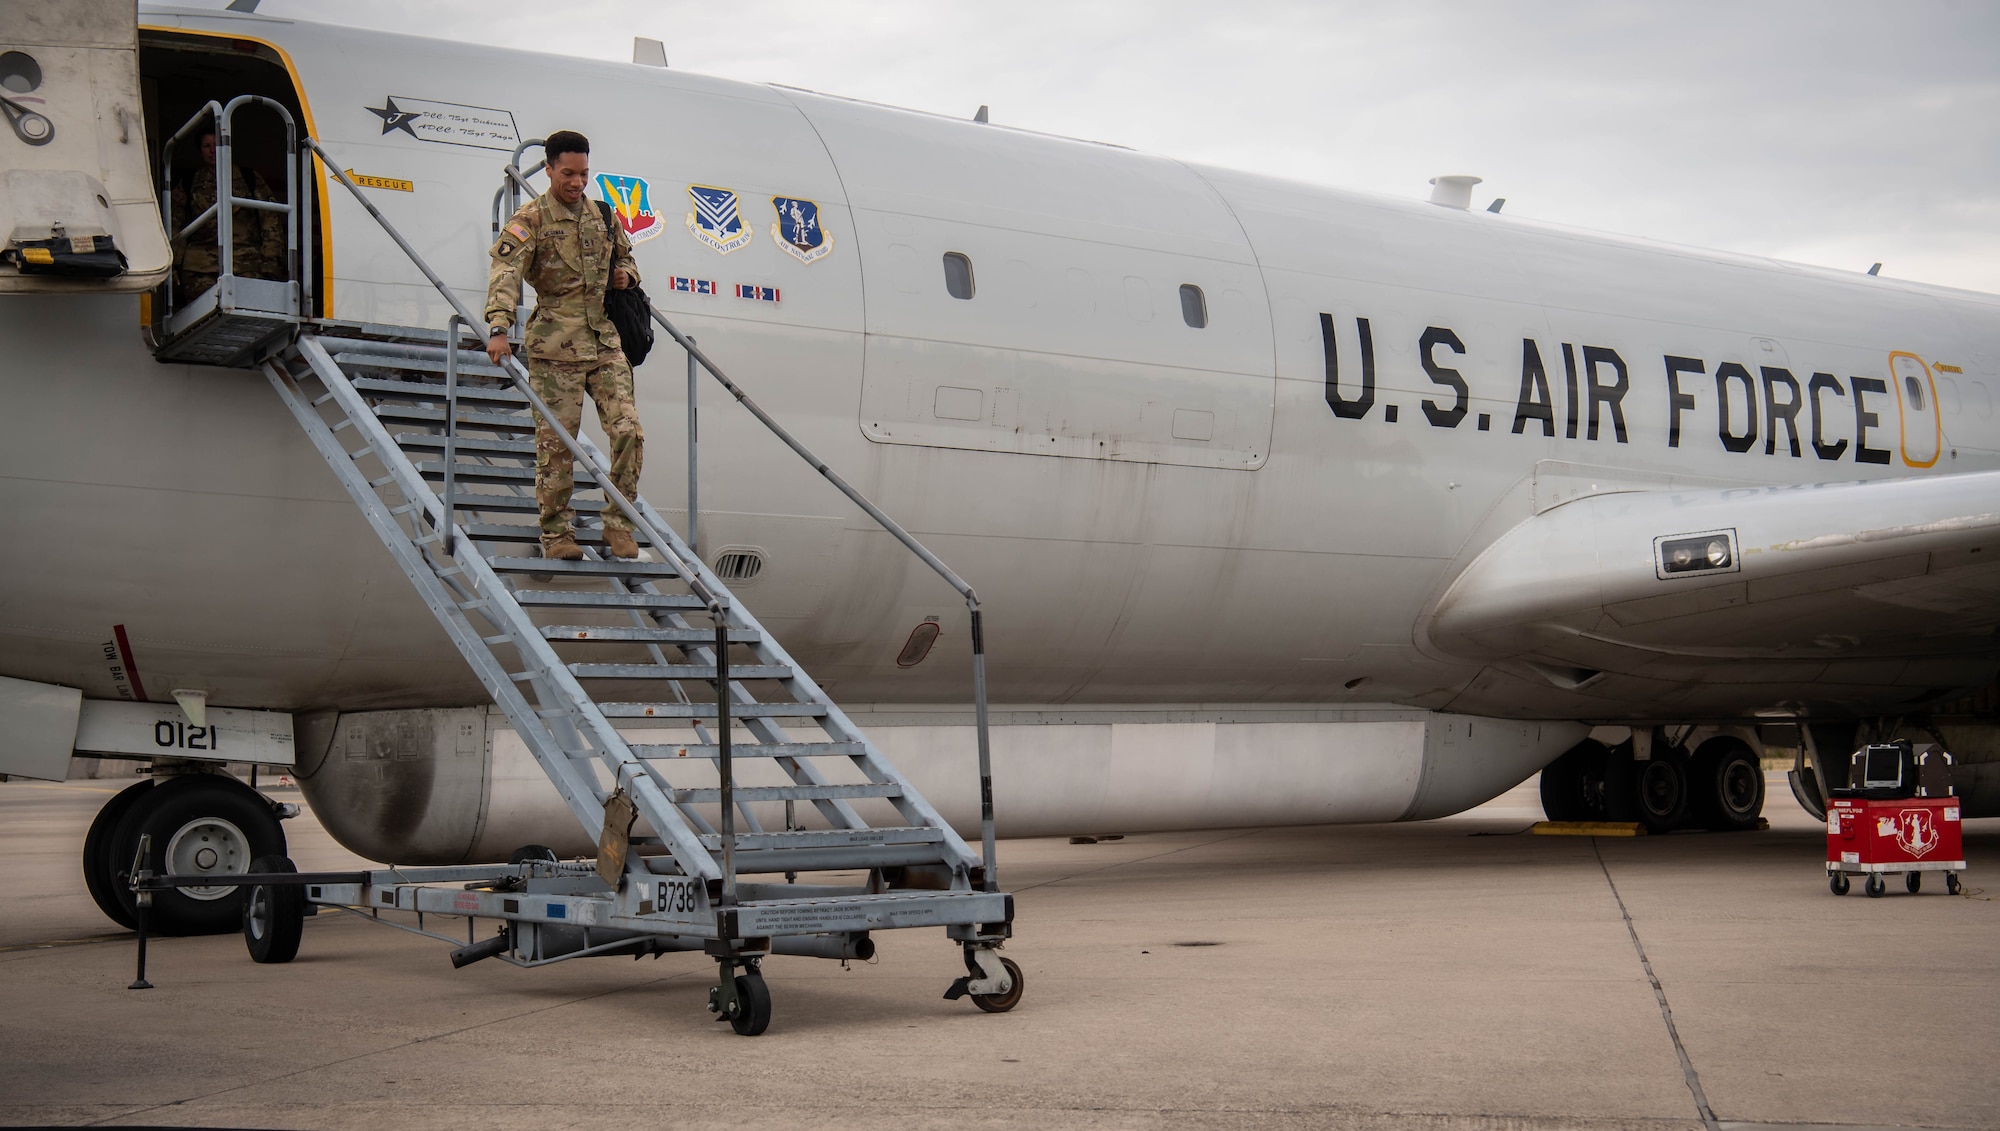 U.S. Army Staff Sgt. Brandon McGowan, 138th Military Intelligence Company Joint Surveillance Target Attack Radar System aircraft crew member, exits an E-8C JSTARS for the last time at Ramstein Air Base, Germany, June 22, 2022. Army personnel have worked as liaisons for the JSTARS since 1994, providing a bridge between air and ground forces. Due to the deactivation of the 138th Military Intelligence Company, Army personnel will no longer work alongside the JSTARS. (U.S. Air Force photo by Airman 1st Class Jared Lovett)